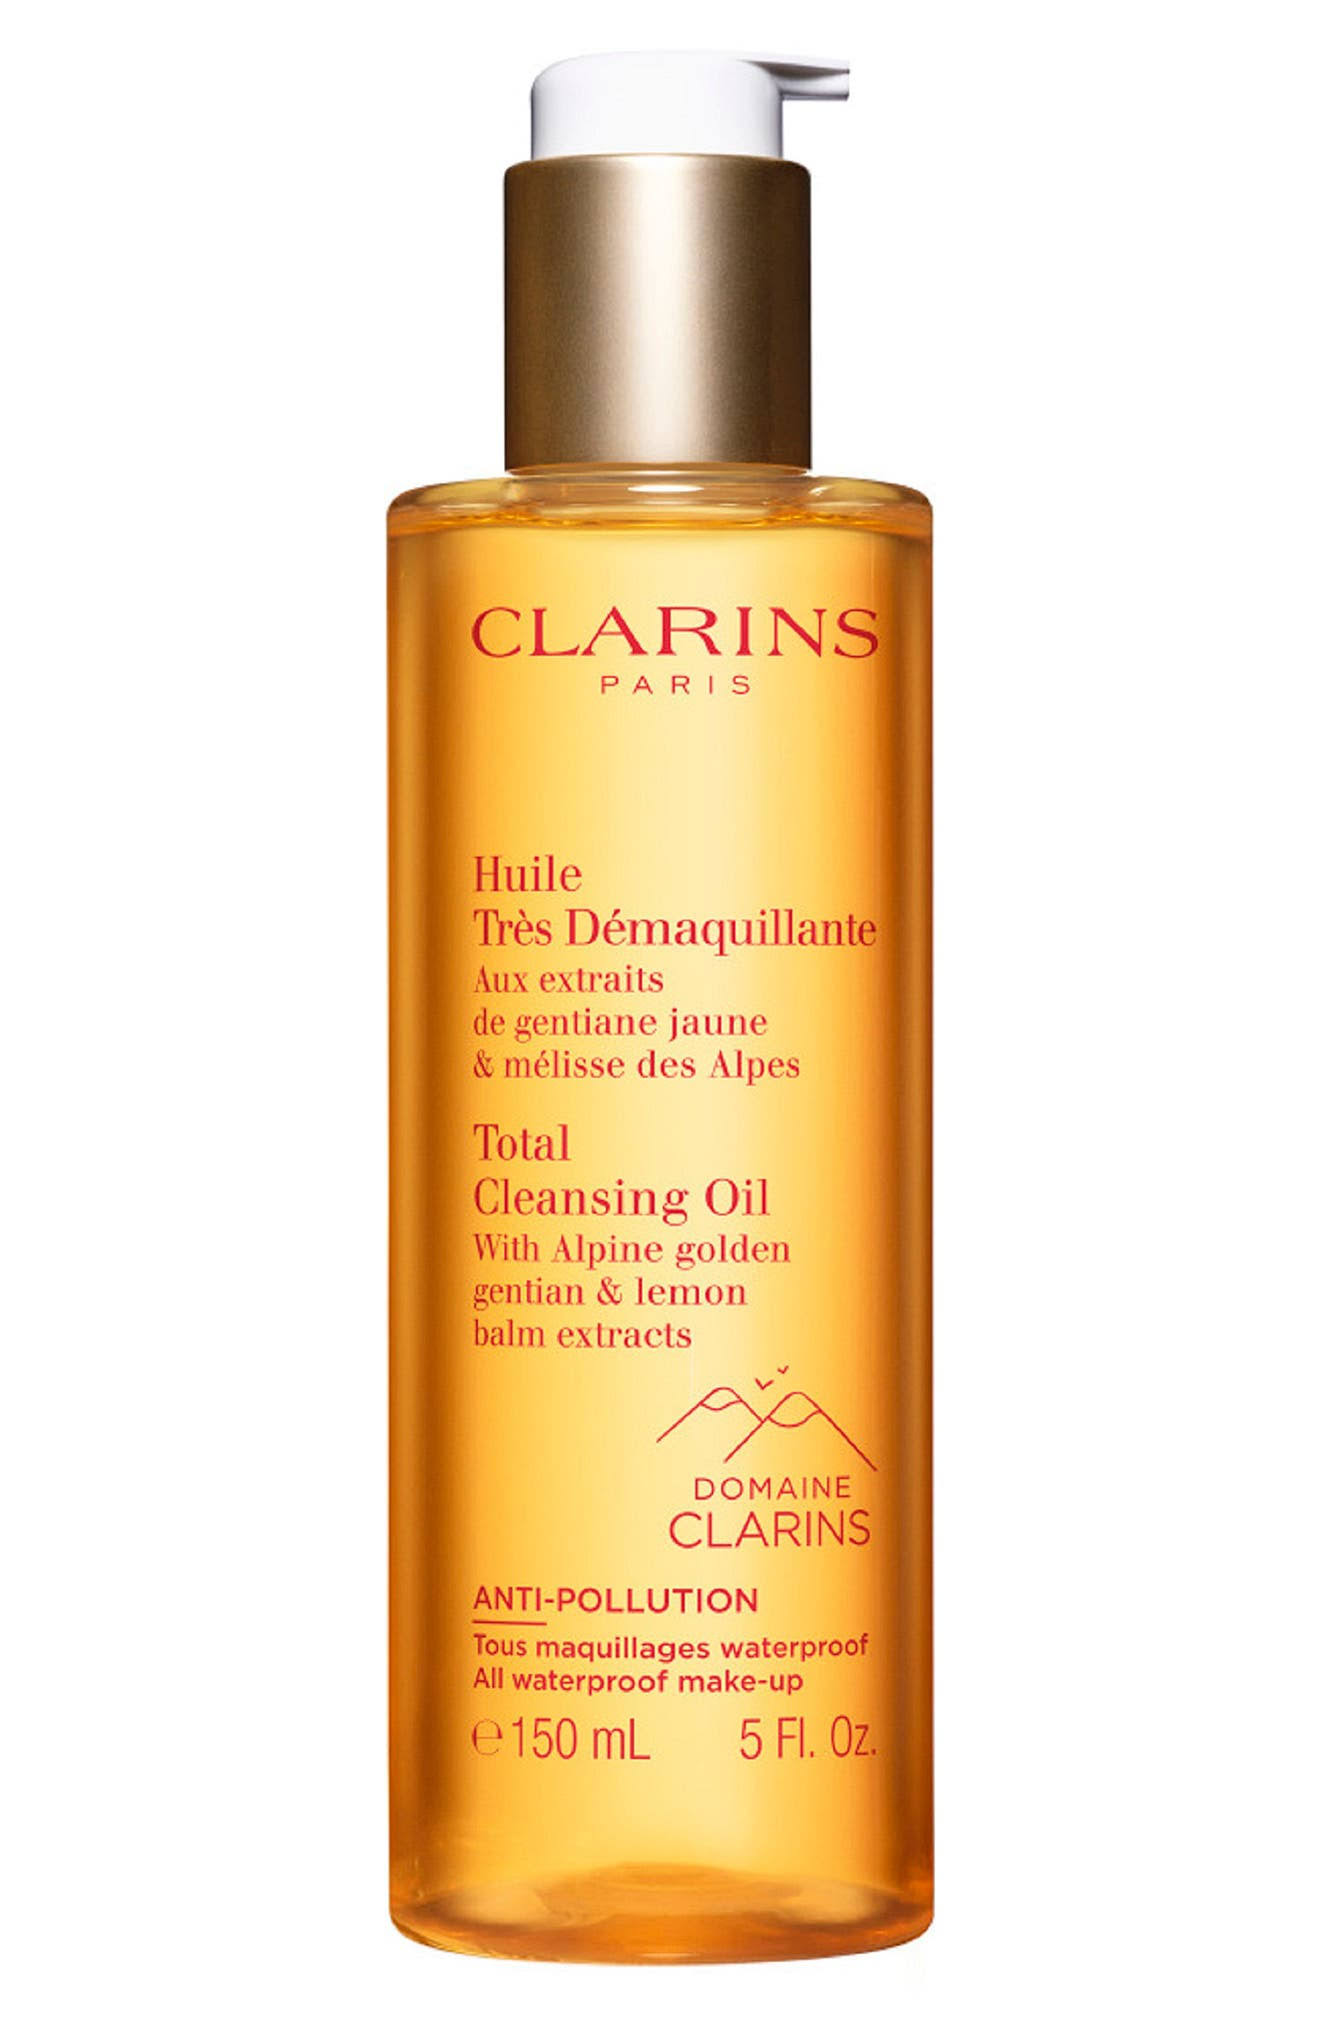 Clarins Total Cleansing Oil 5.0 oz/ 150 ml